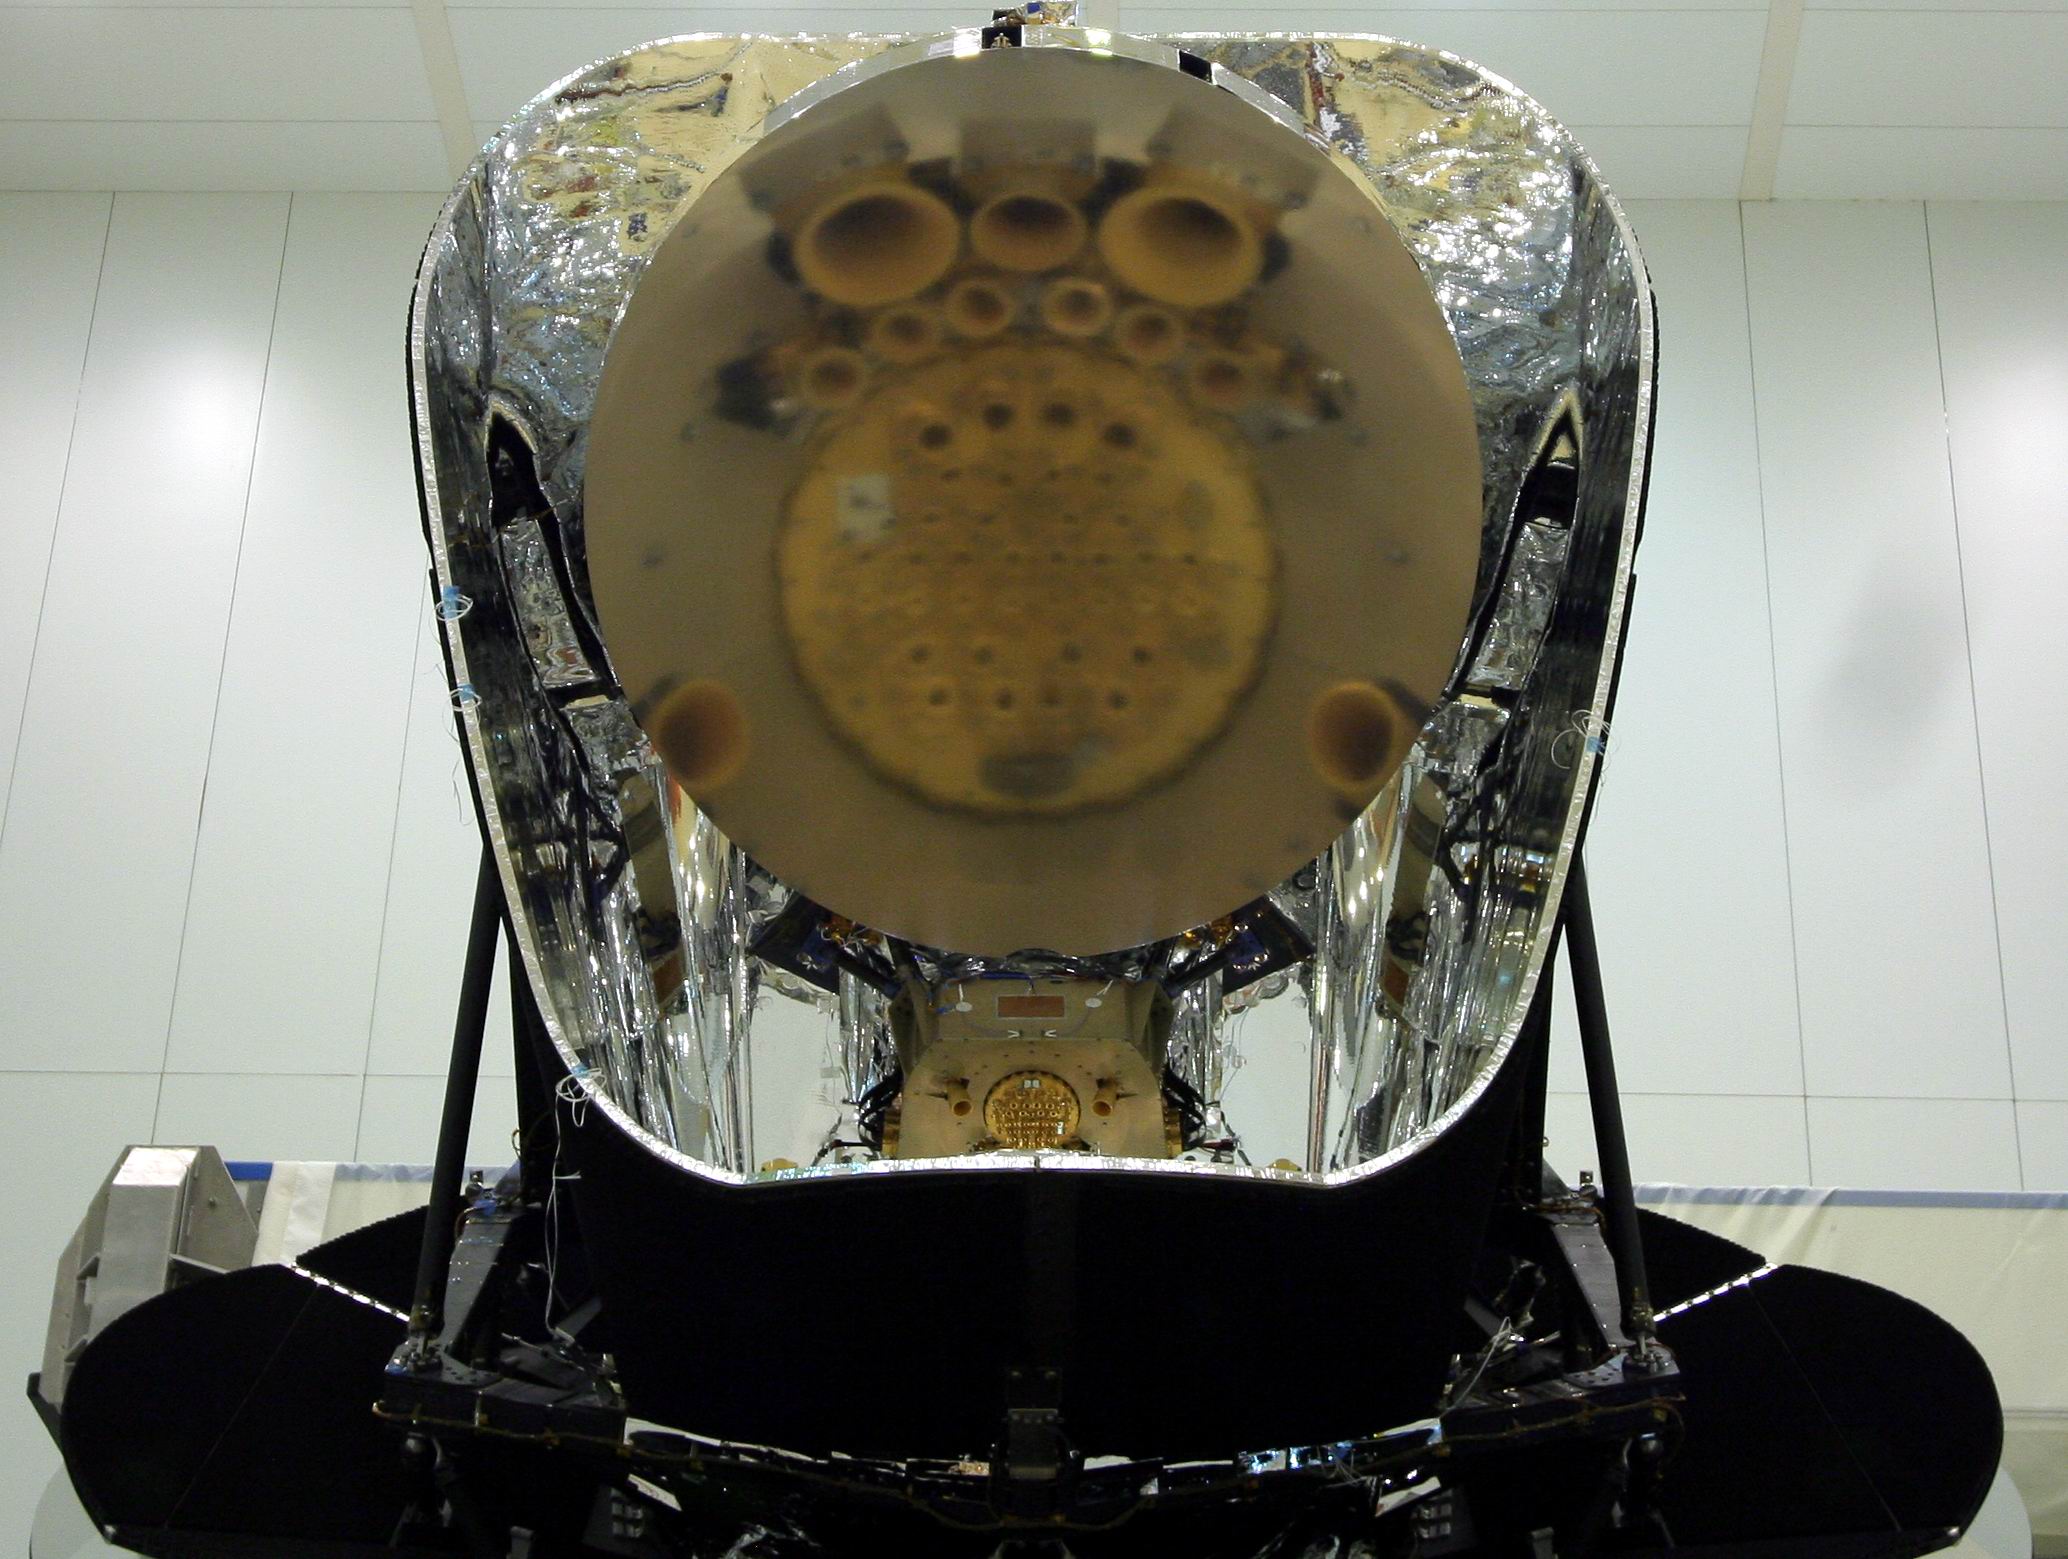 Planck Focal Plane Unit reflected in its primary mirror